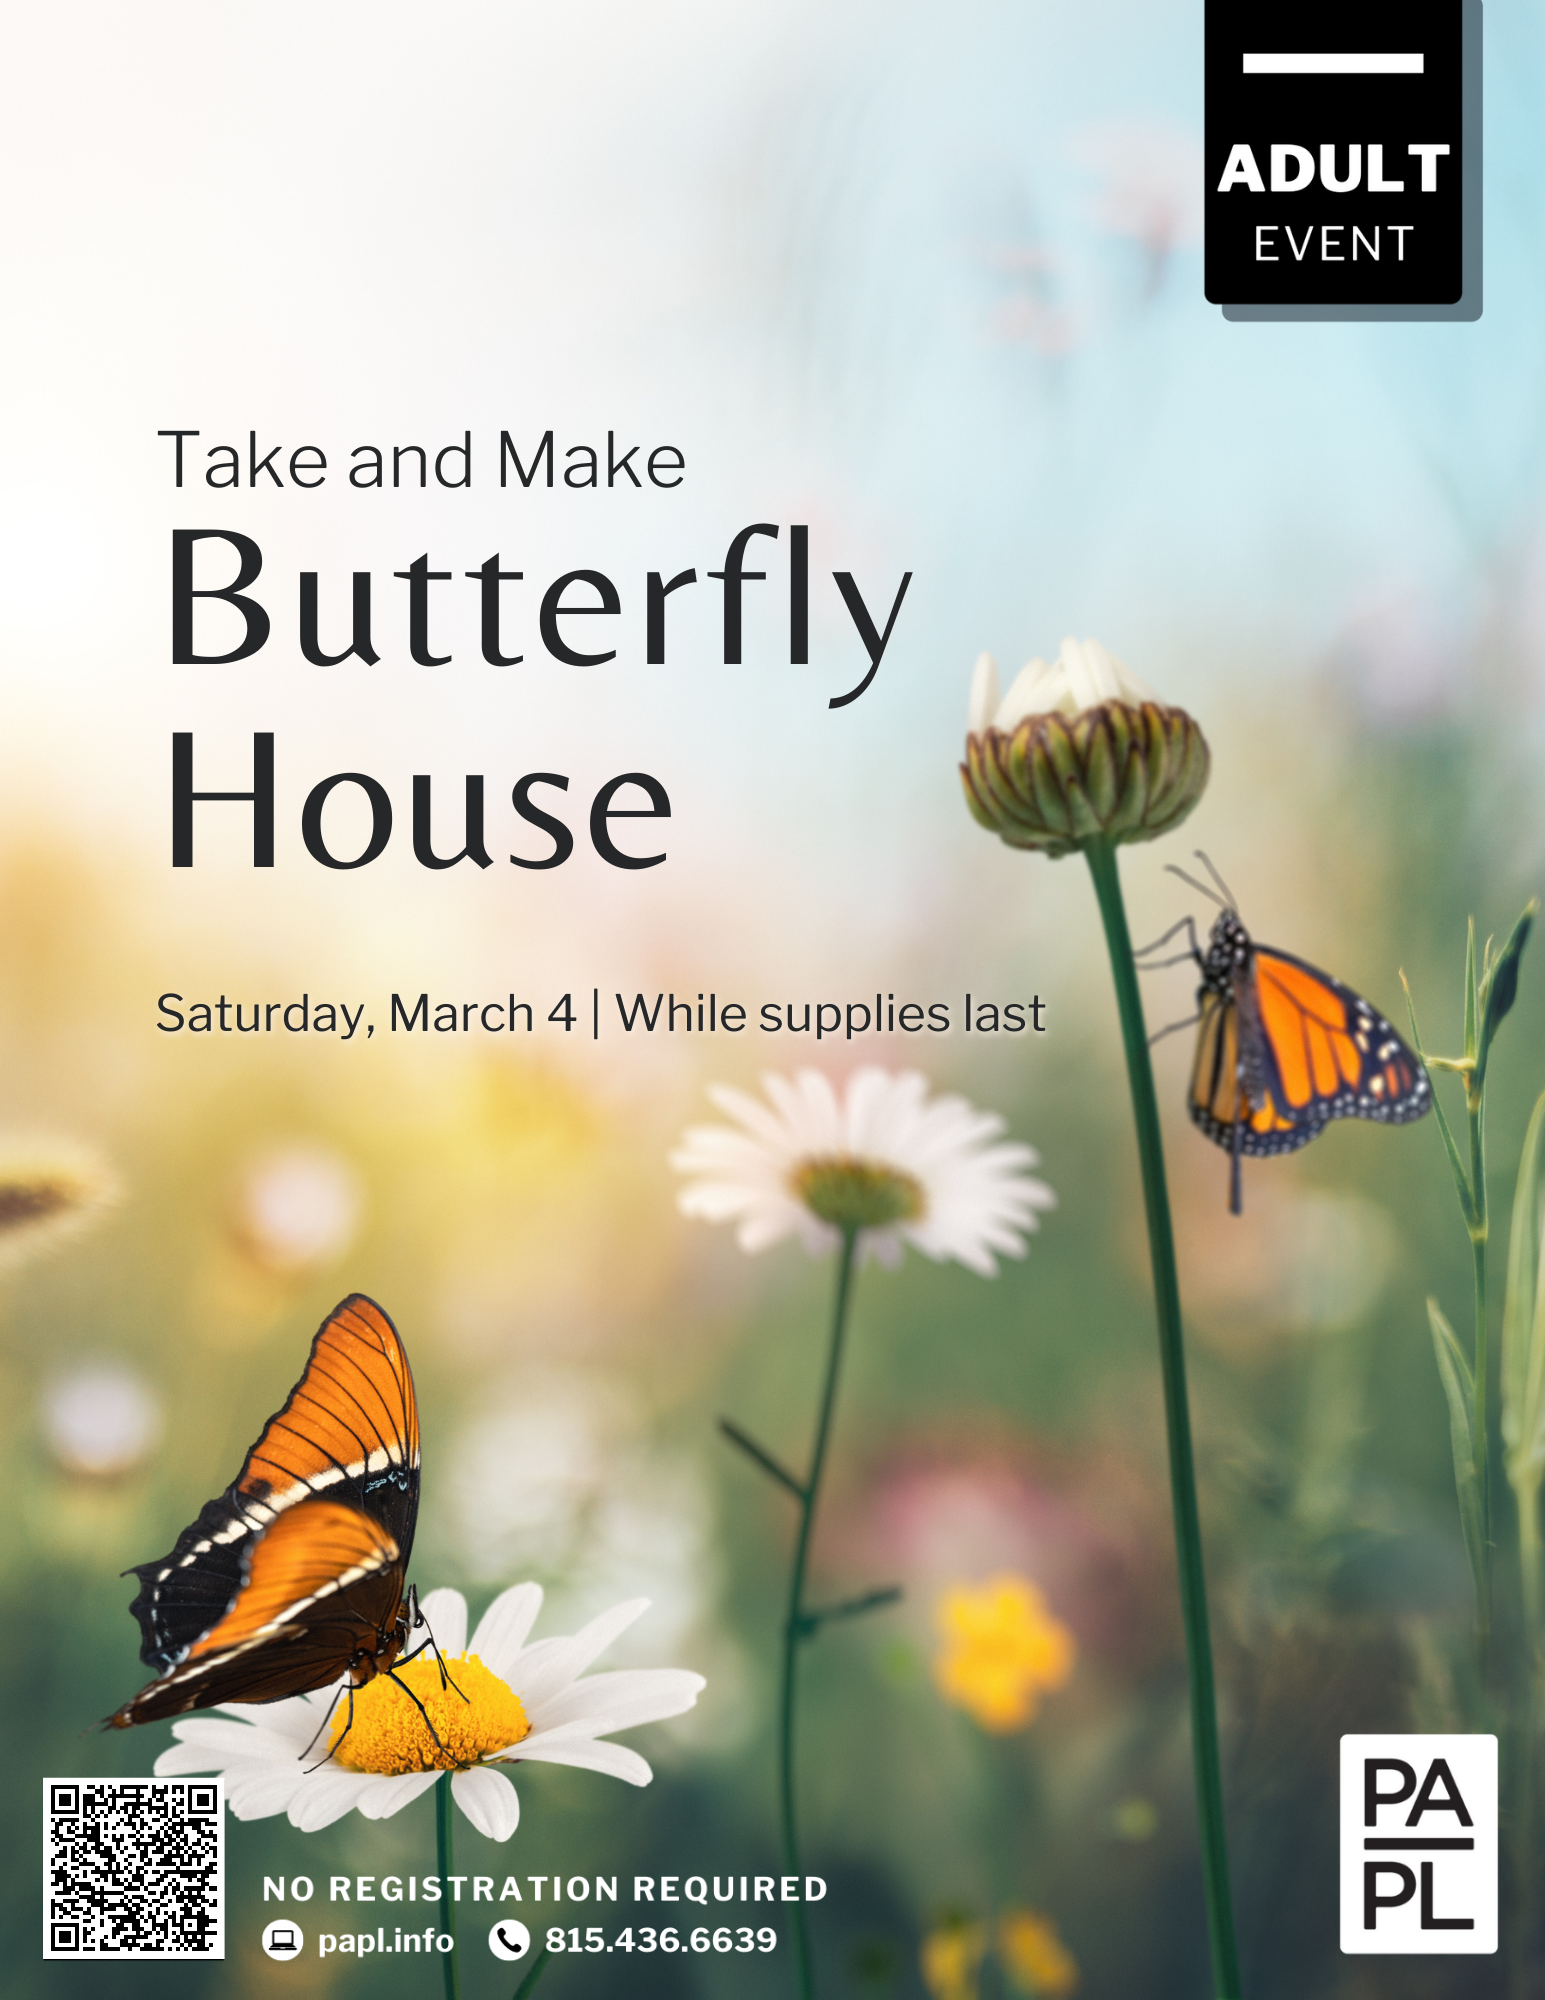 TAKE AND MAKE: Butterfly House